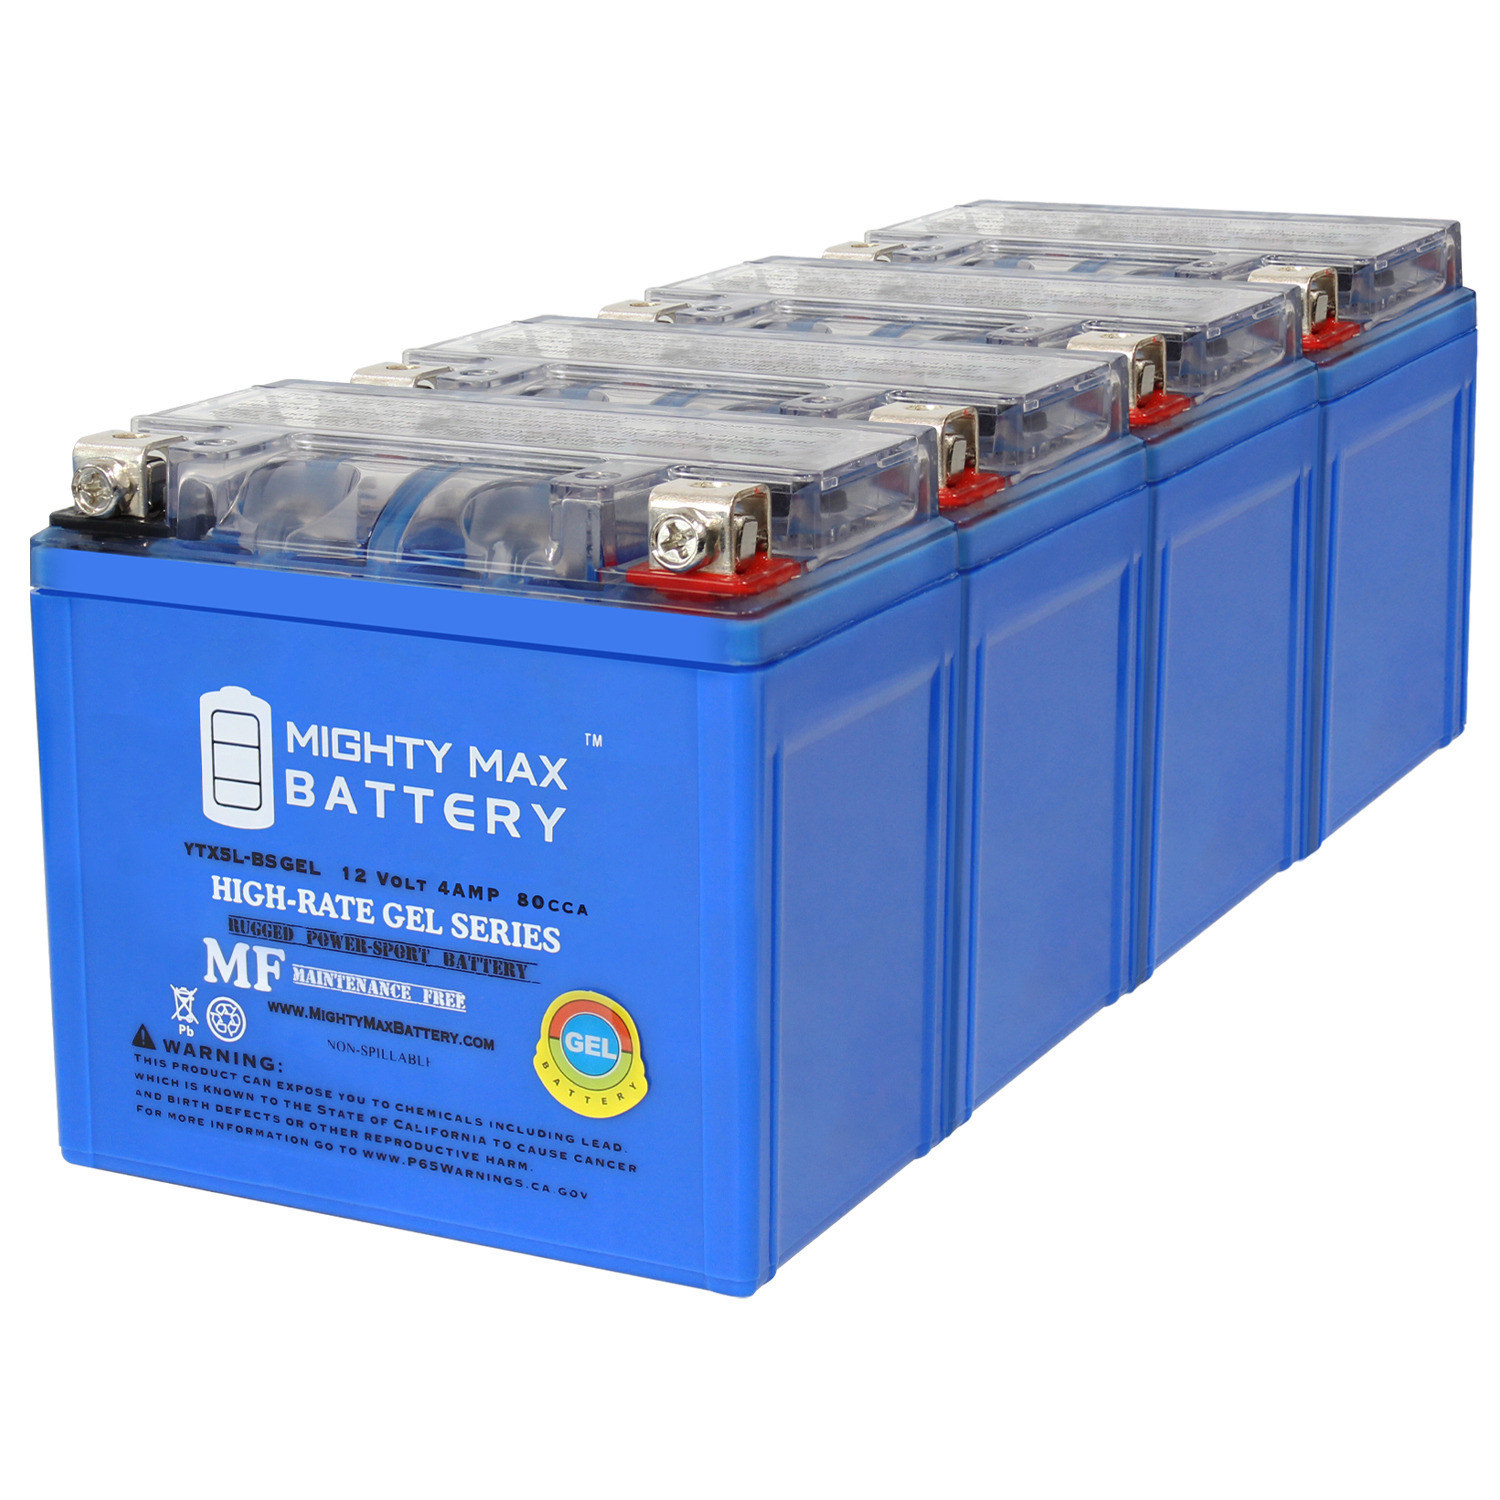 YTX5L-BSGEL 12V 4AH Replacement Battery compatible with KTM 525EXC Motorcycle 03-05 - 4 Pack